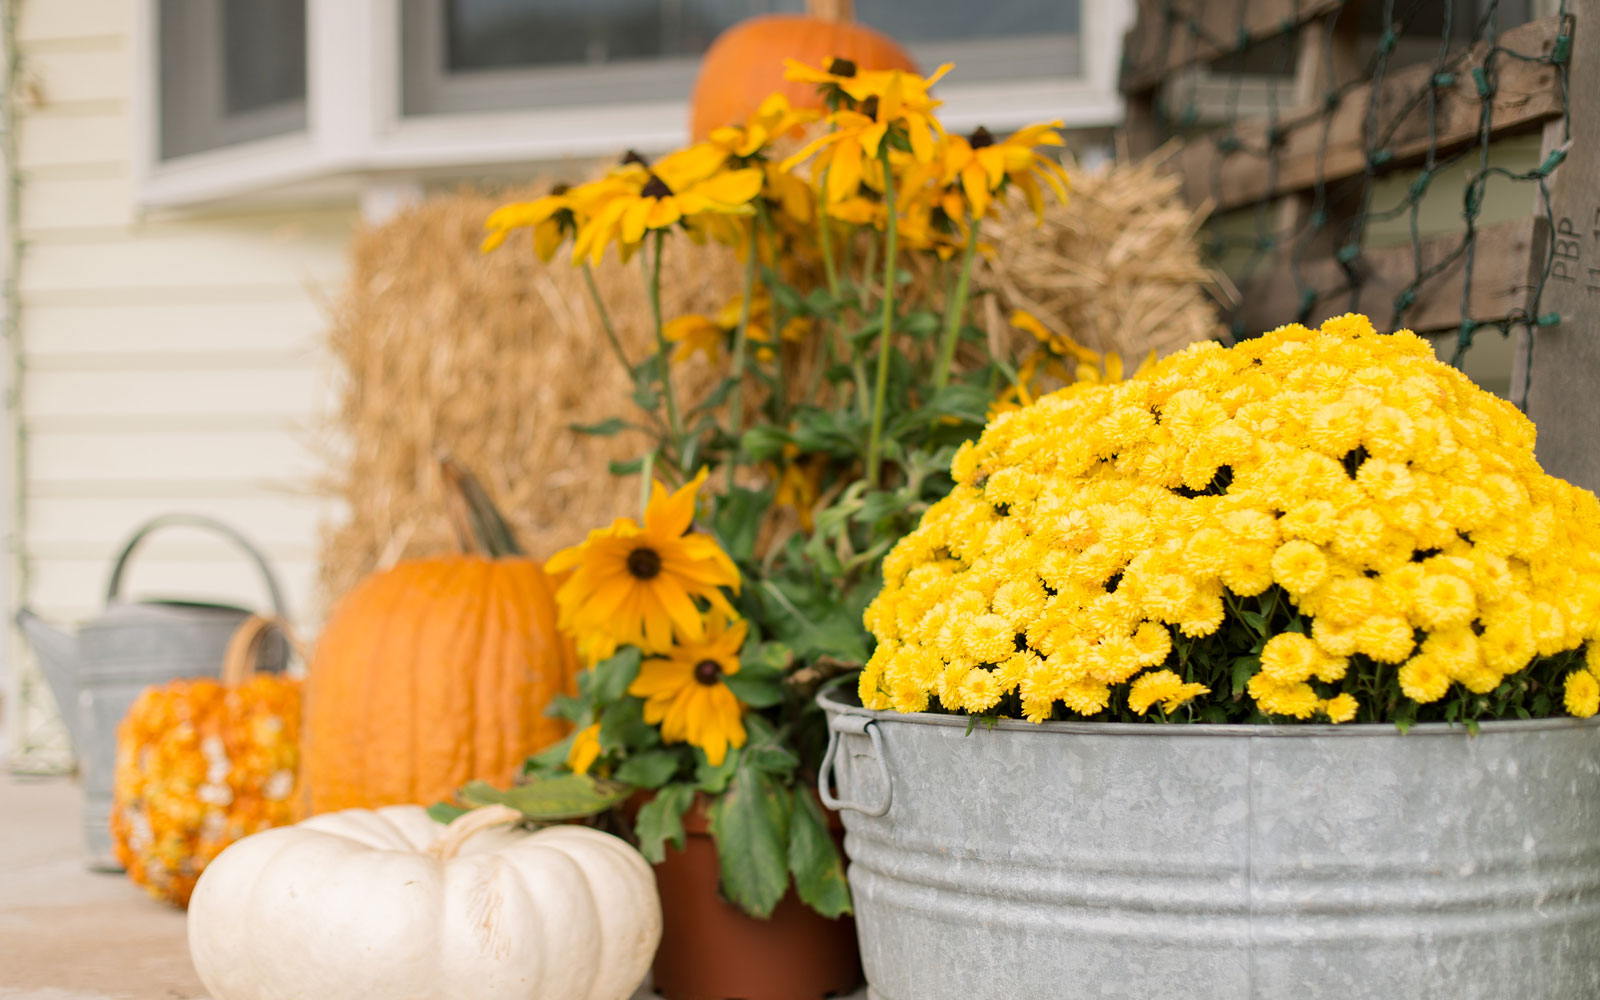 Decorate your home for fall with front porch planters